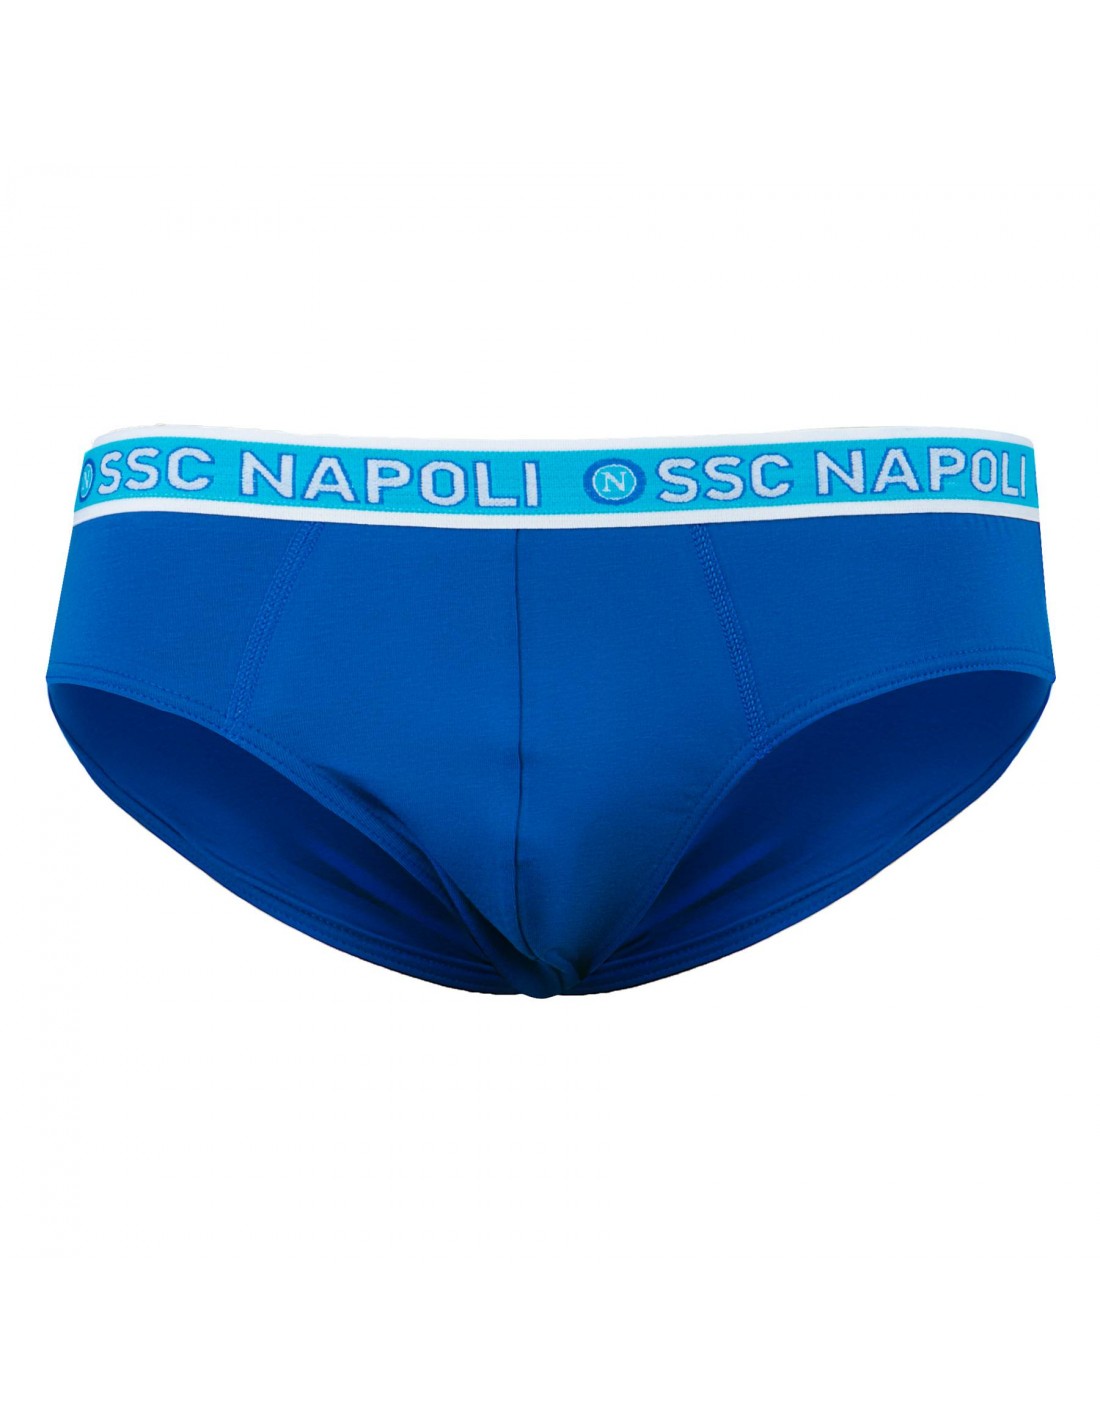 Napoli Store, Official Product SSC Napoli